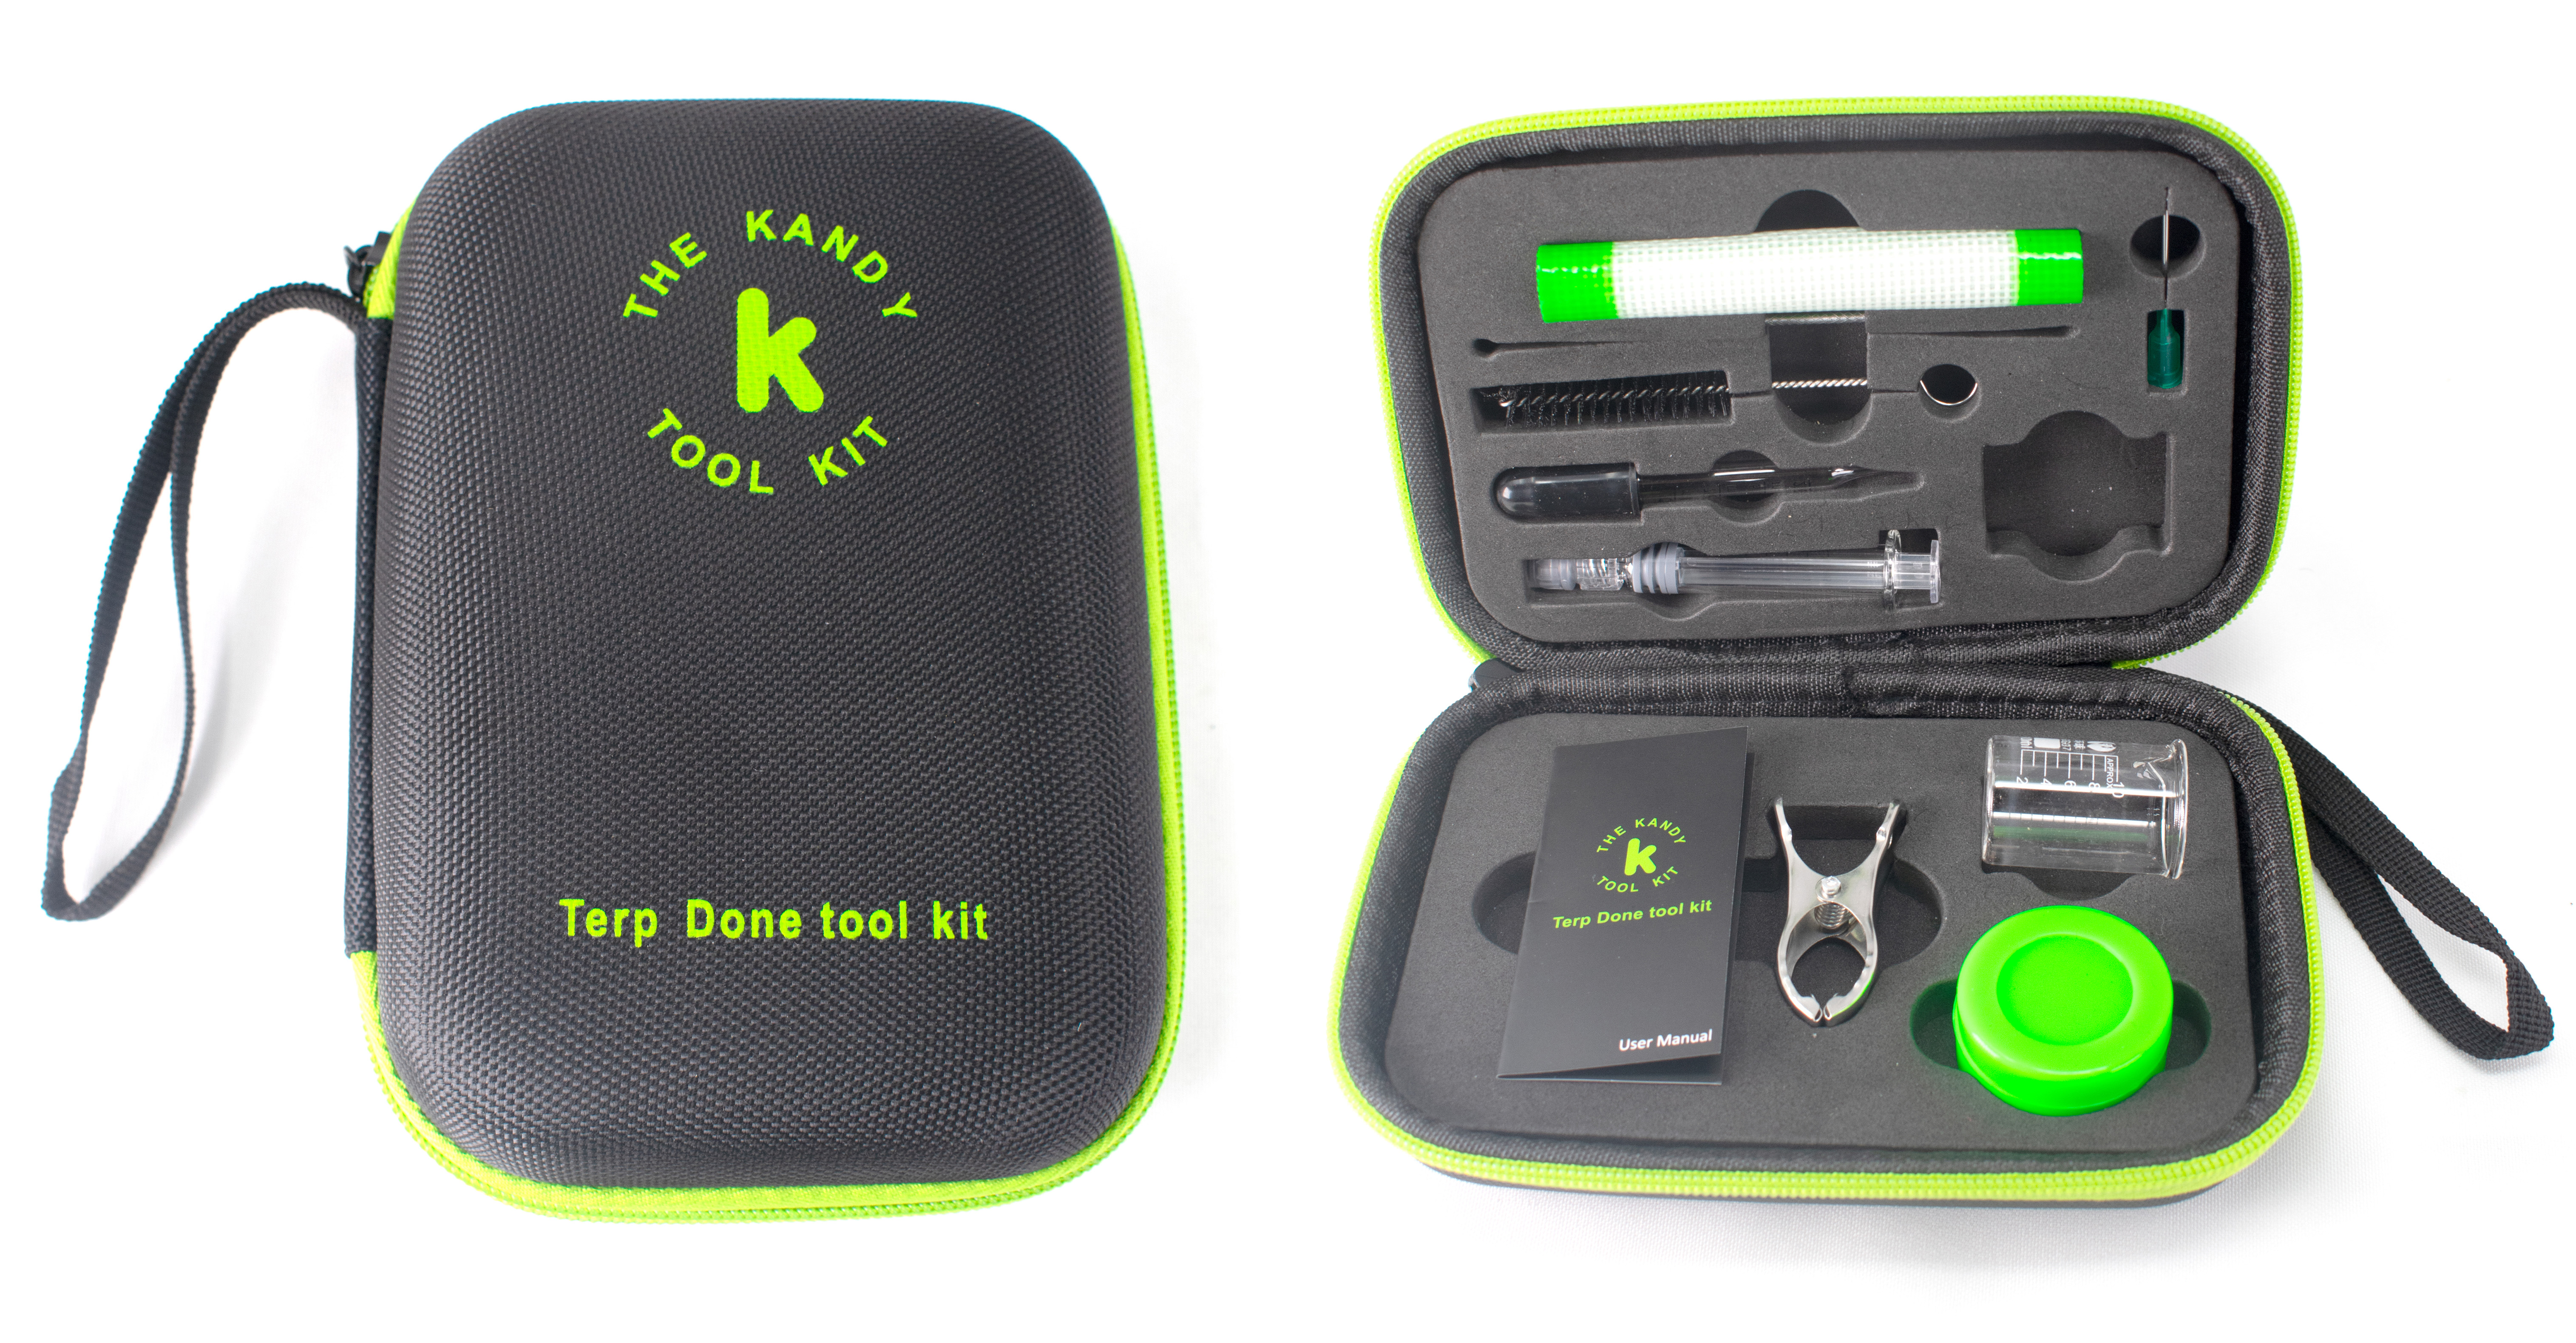 The Kandy Terp Done Dab Tool Kit